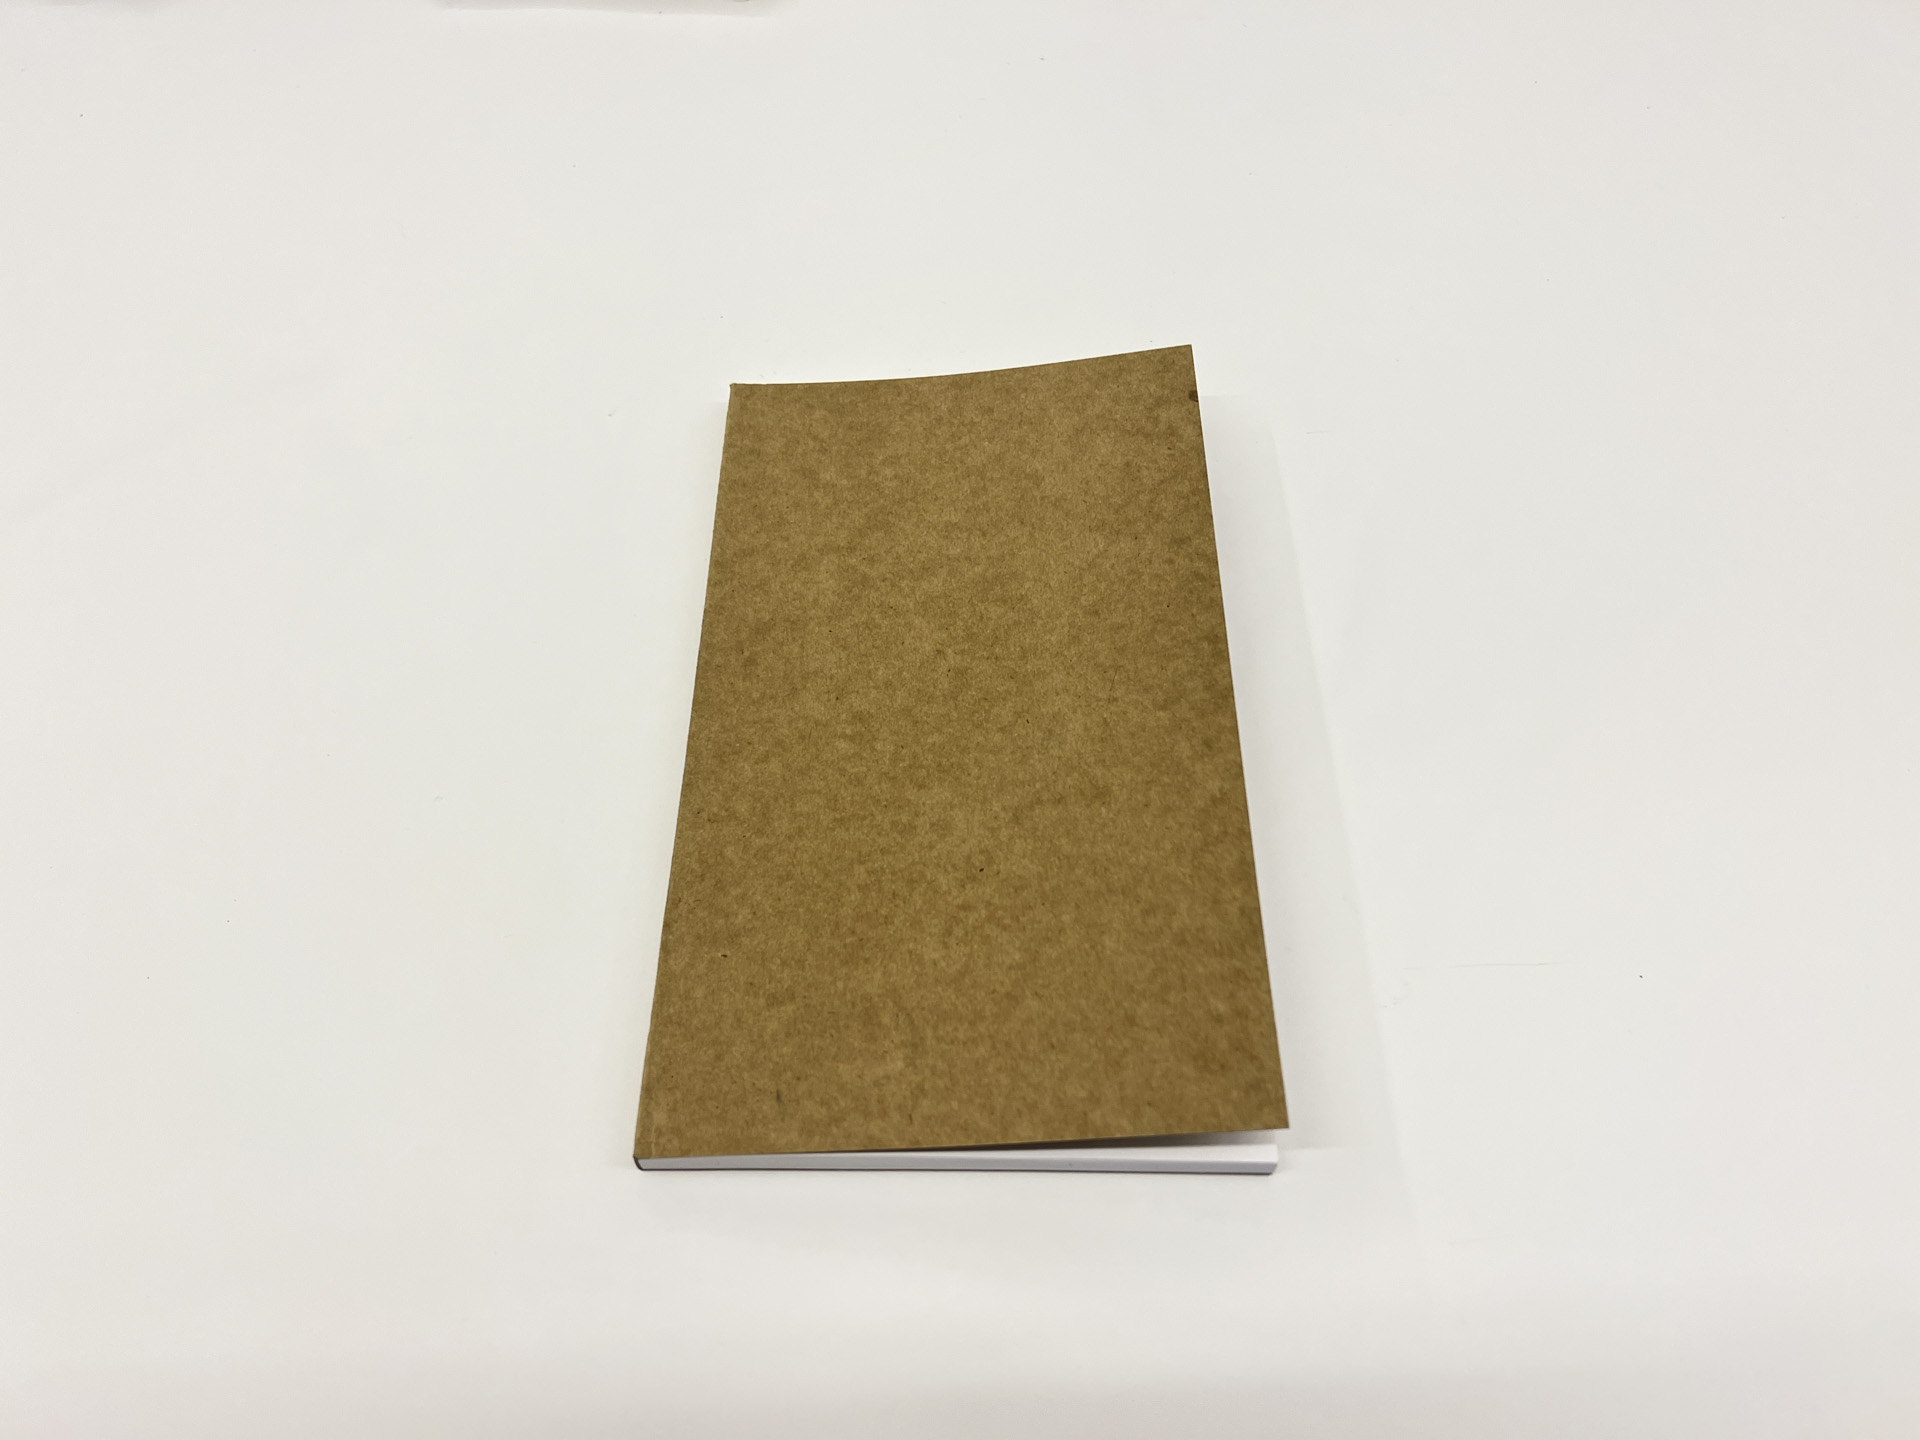 photo of a brown book, closed with cover - plain with no text